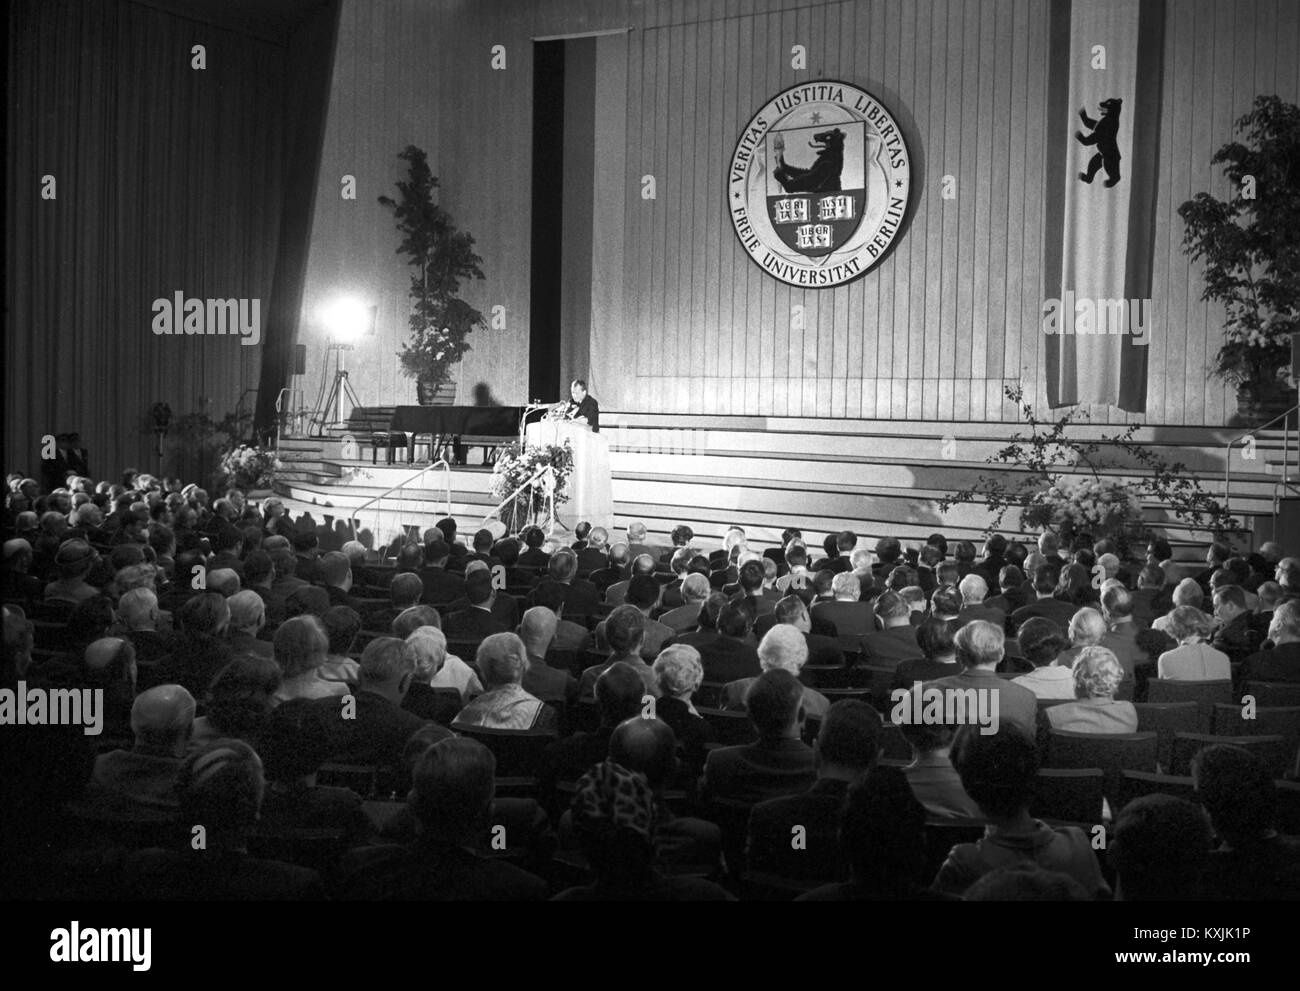 Federal foreign minister Willy Brandt (SPD) during his - undisturbed - speech. About 50 students tried to disturb the ceremony on the occasion of Walther Rathenau's 100th birthday in the Auditorium Maximum of Berlin University on 06 October 1967. | usage worldwide Stock Photo